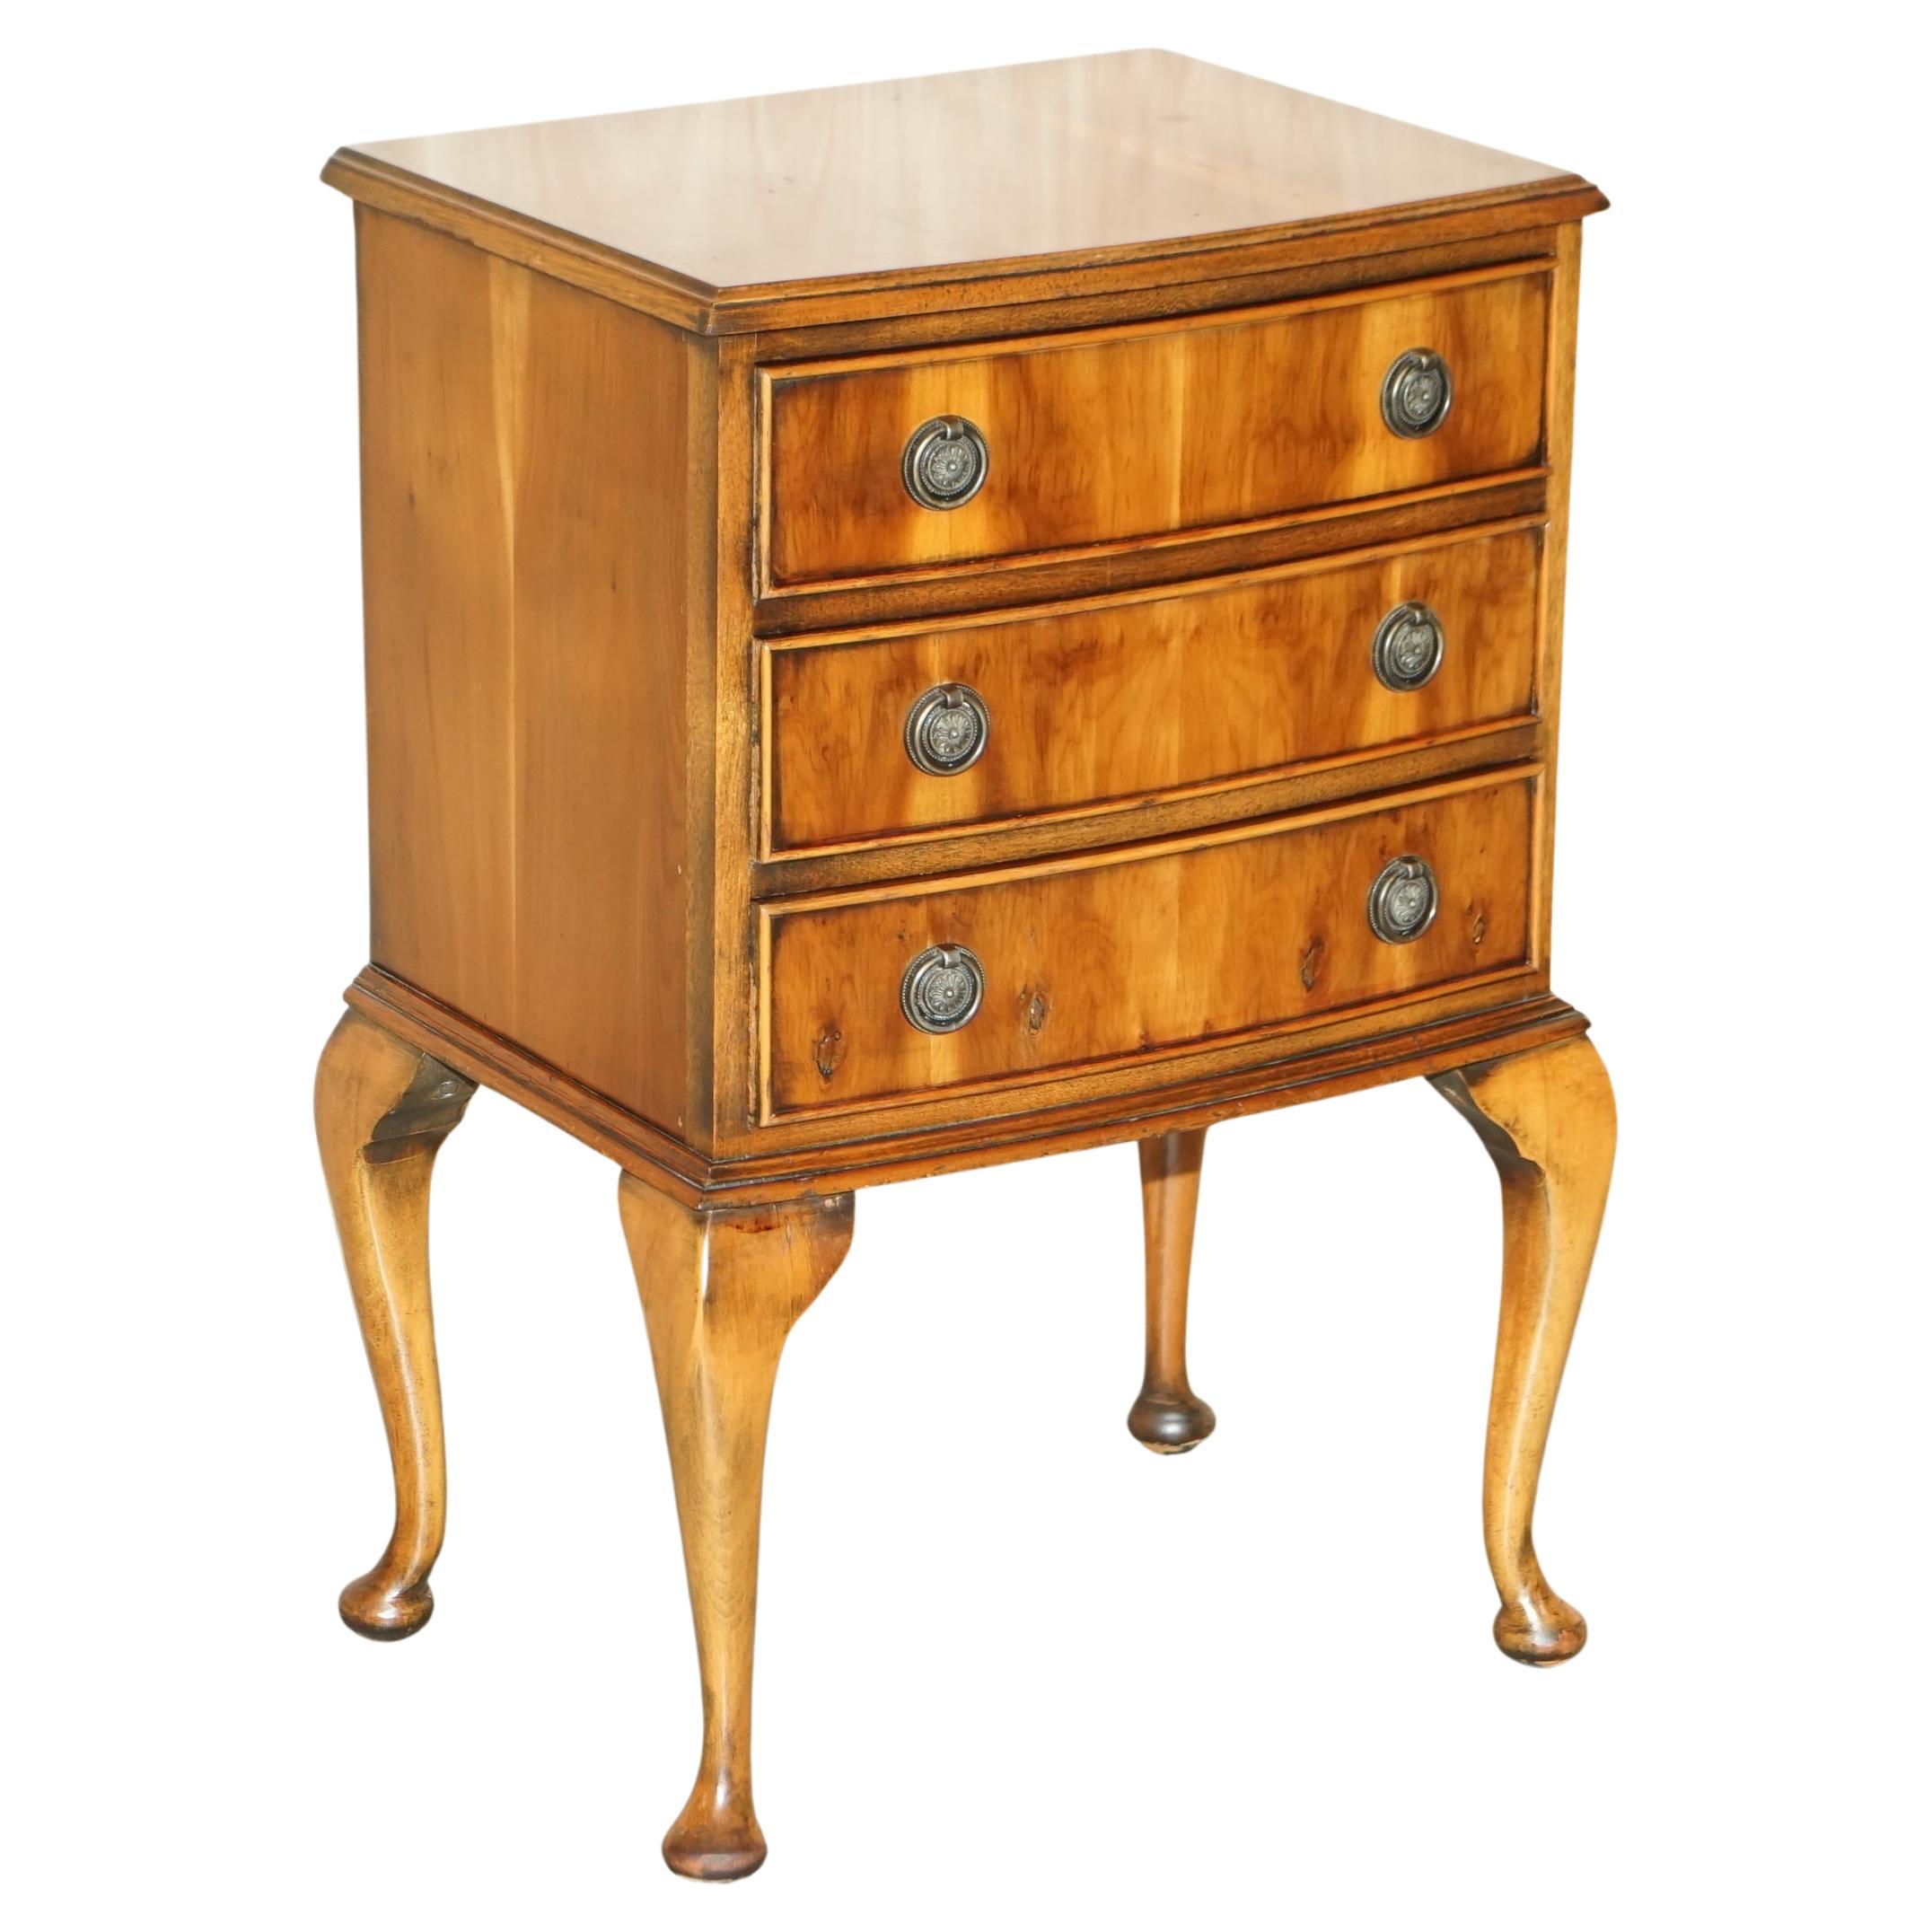 CIRCA 1940's BURR YEW WOOD BOW FRONTED BEDSIDE SIDE TABLE CHEST OF DRAWERS For Sale